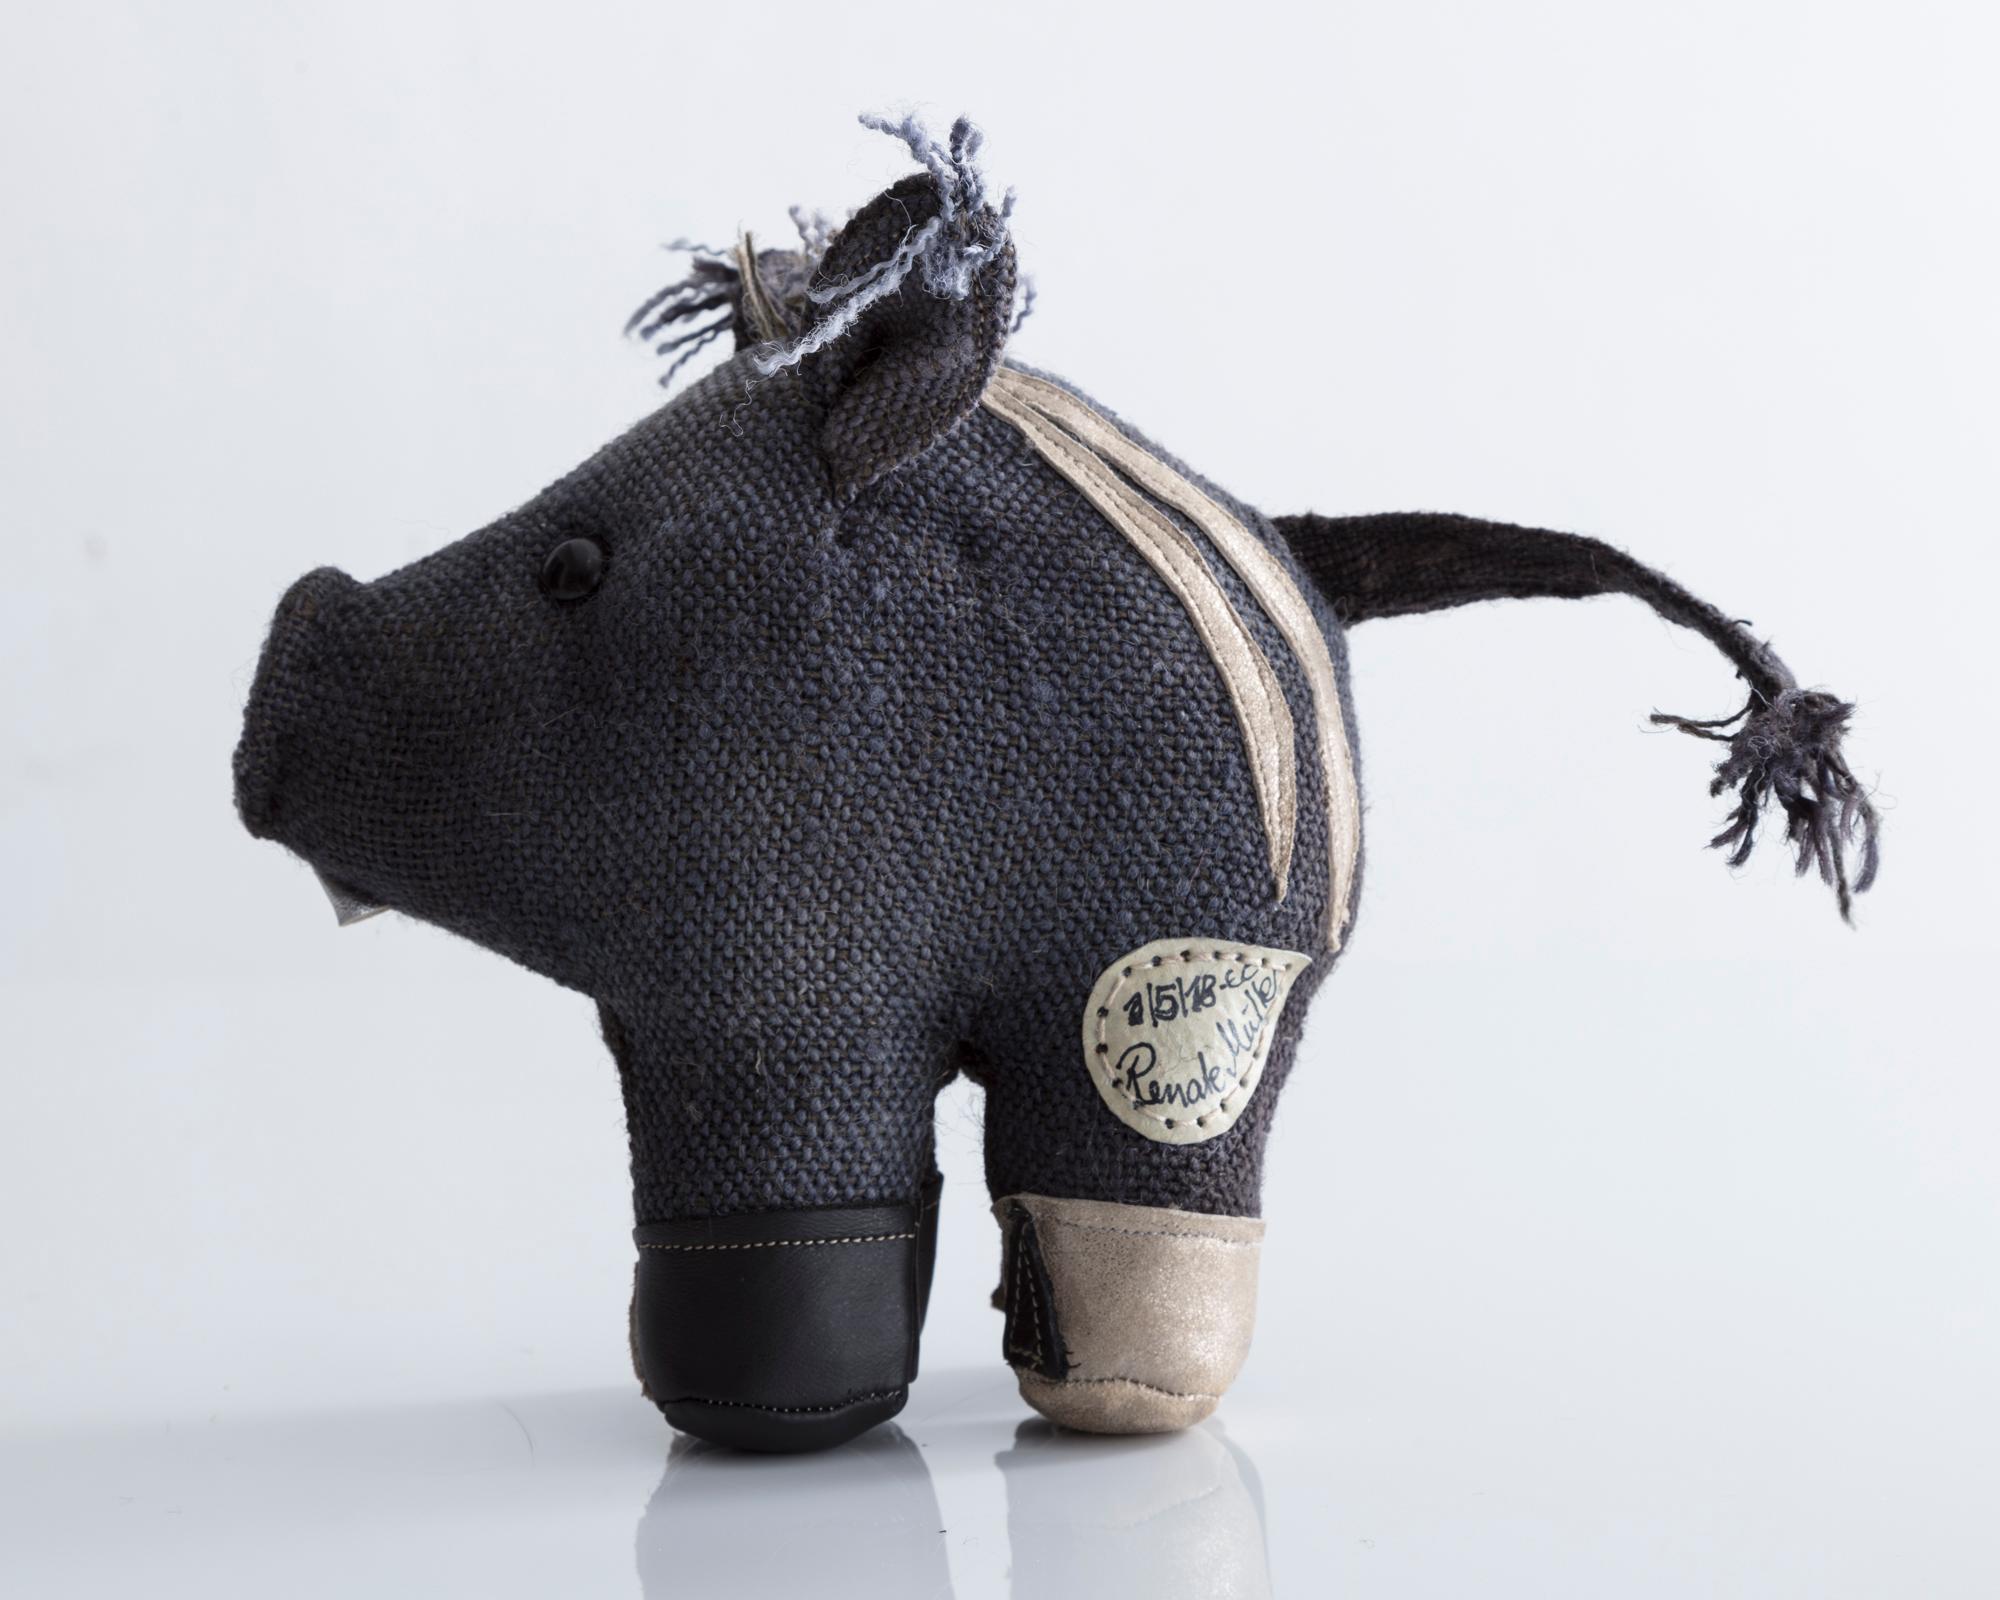 Therapeutic Toy Wild Boar in jute and leather, with plastic detailing. Designed and made by Renate Müller, Germany, 2018.